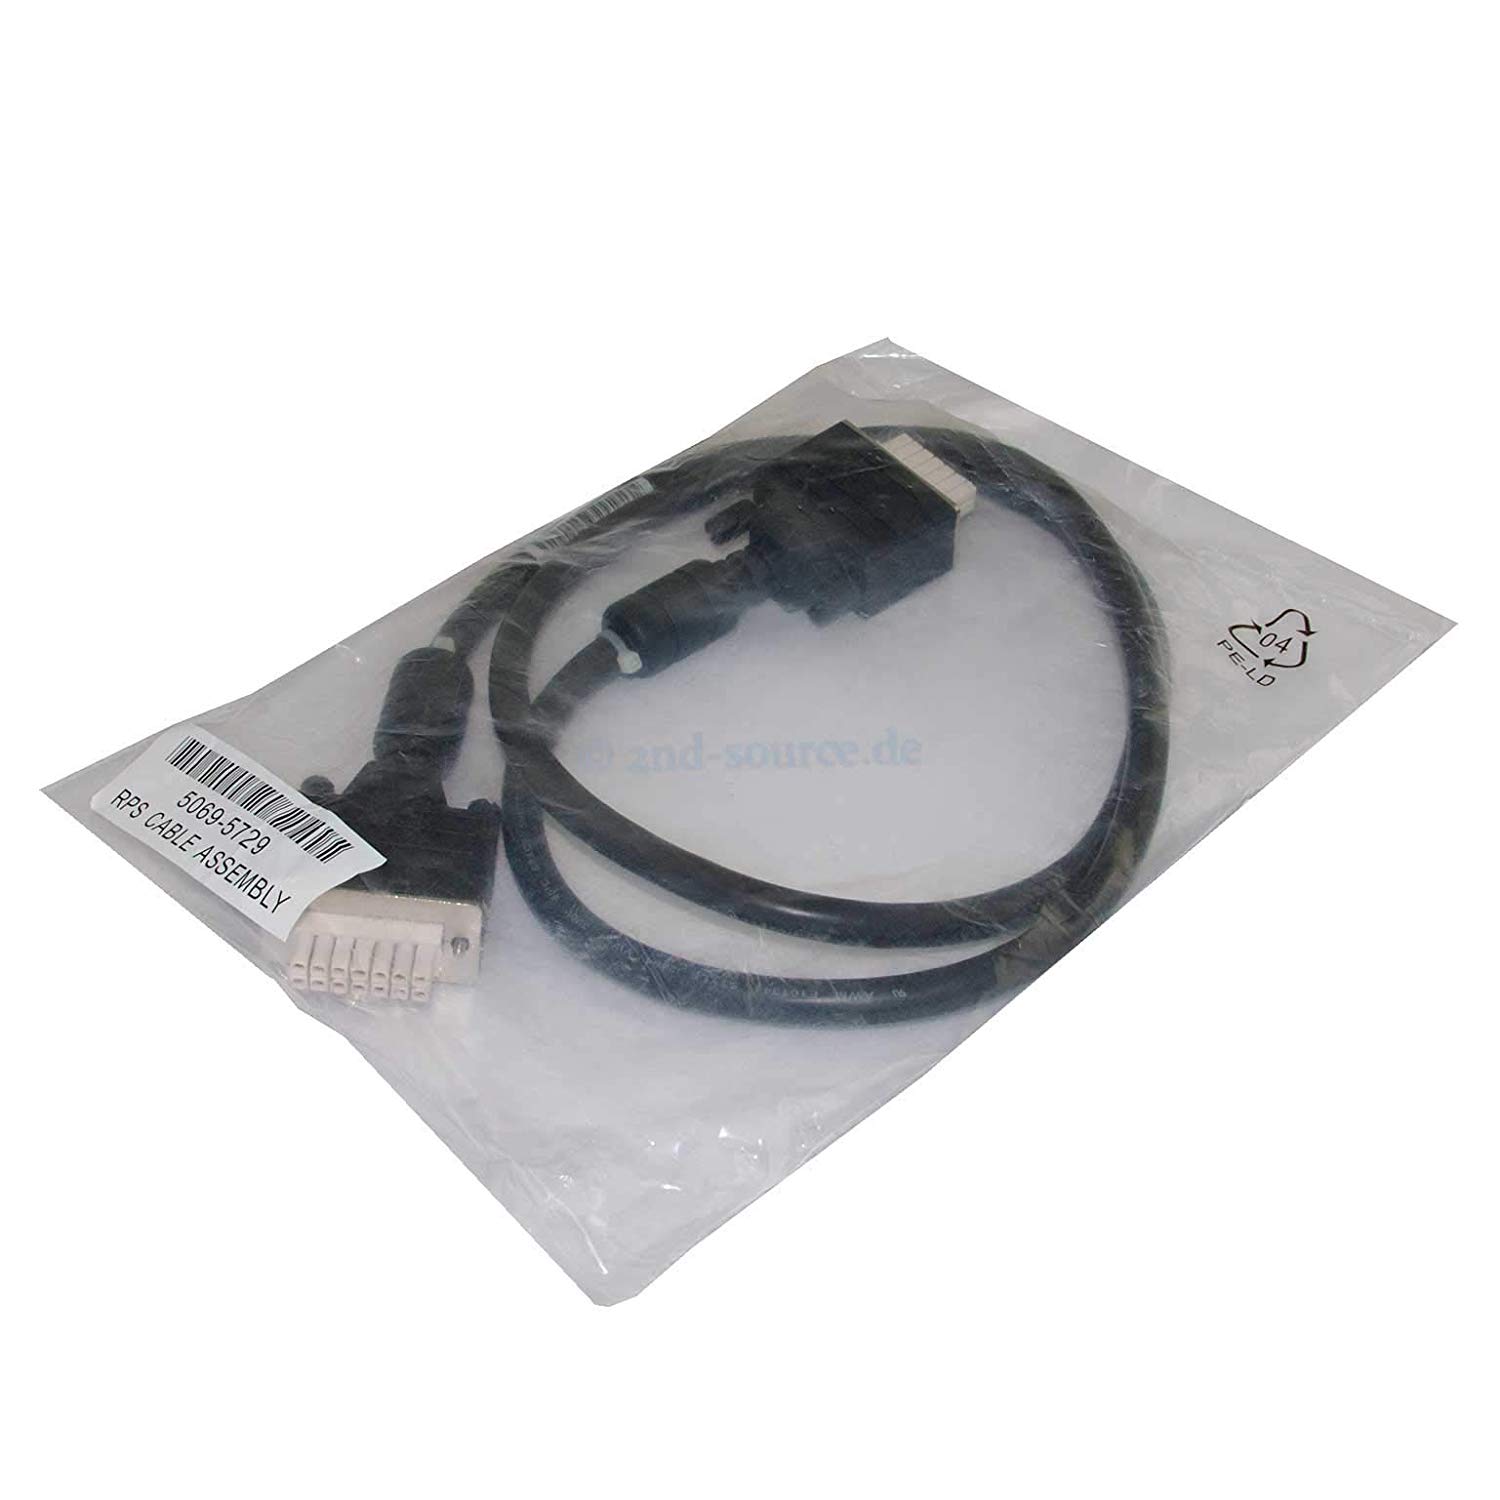 HP Redundant RPS cable assy (5069-5729)